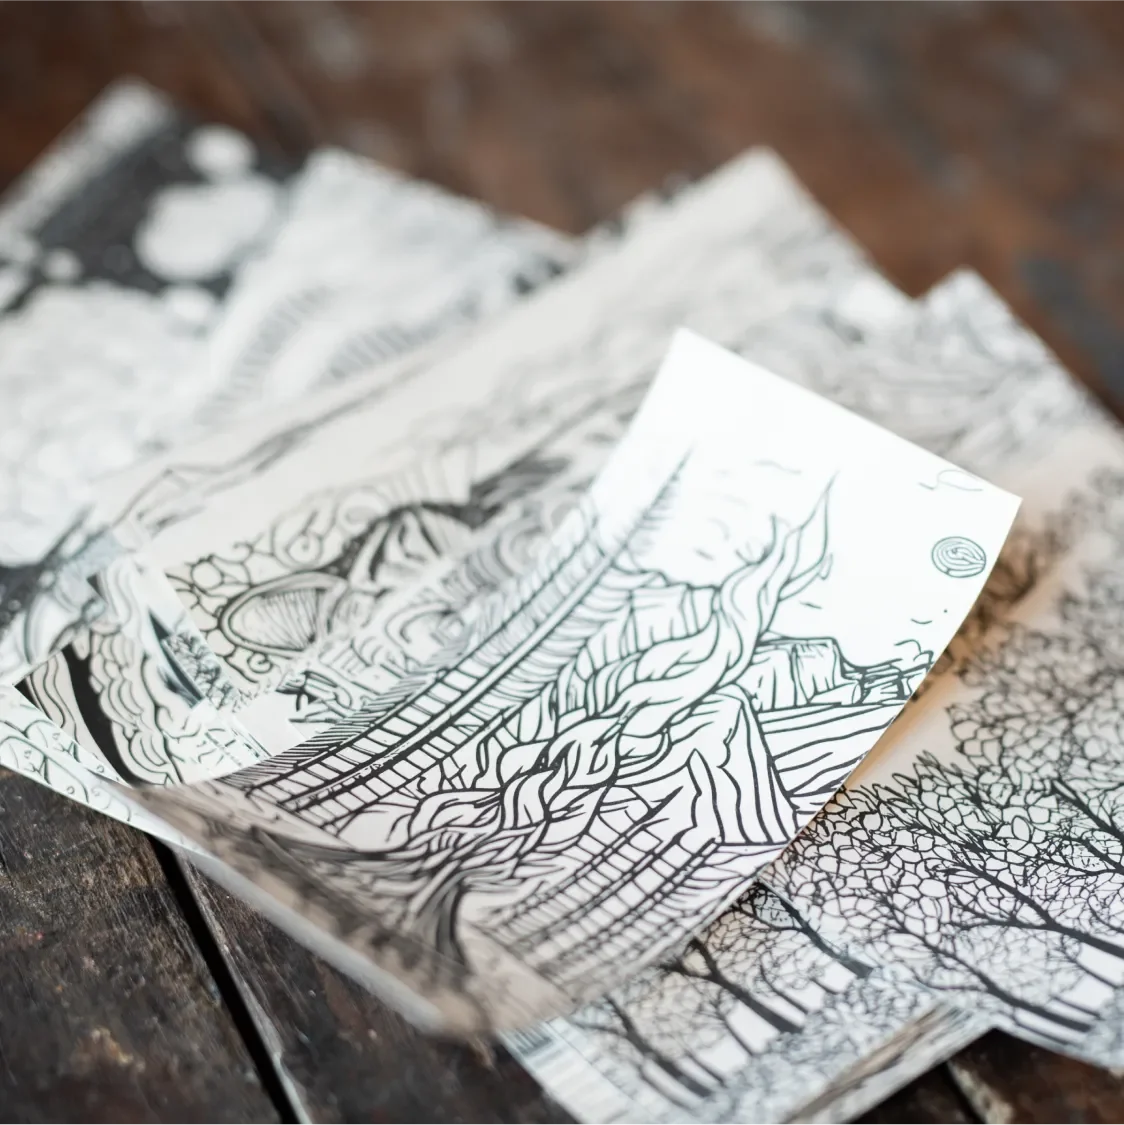 Coloring book pages in a stack featuring the bonfire page on top